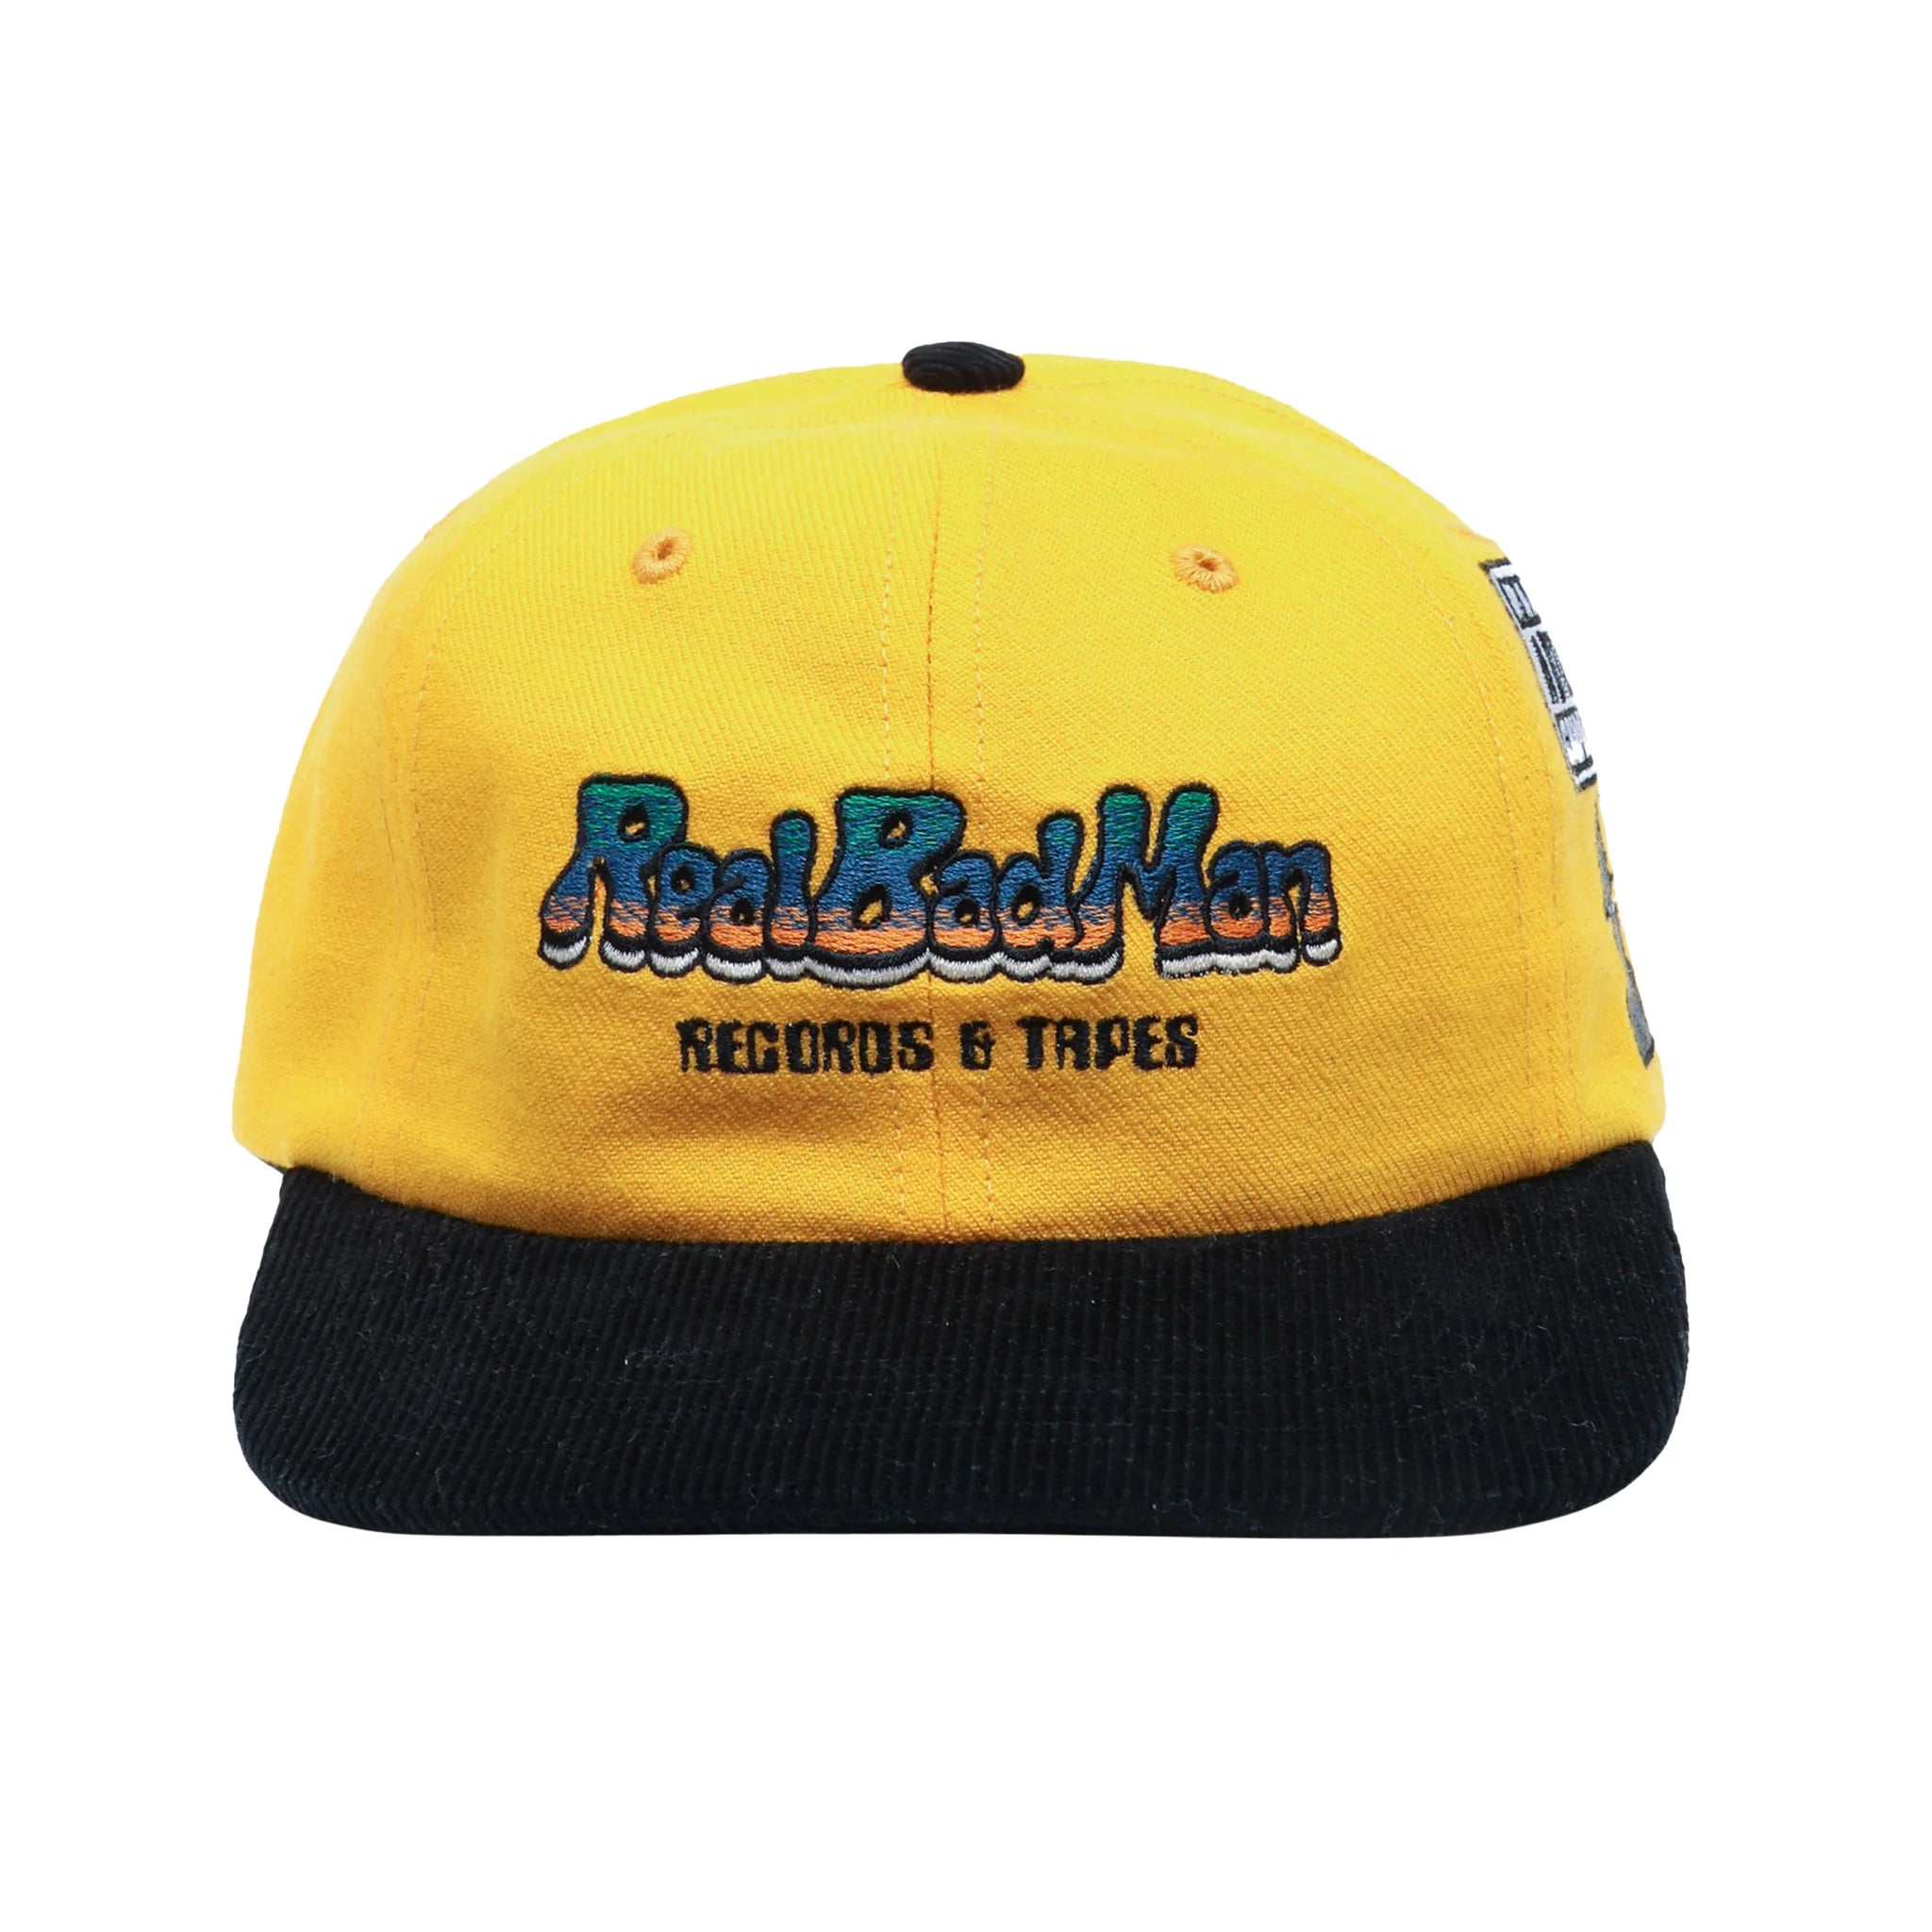 Real Bad Man Records And Tapes Hat 'Yellow'